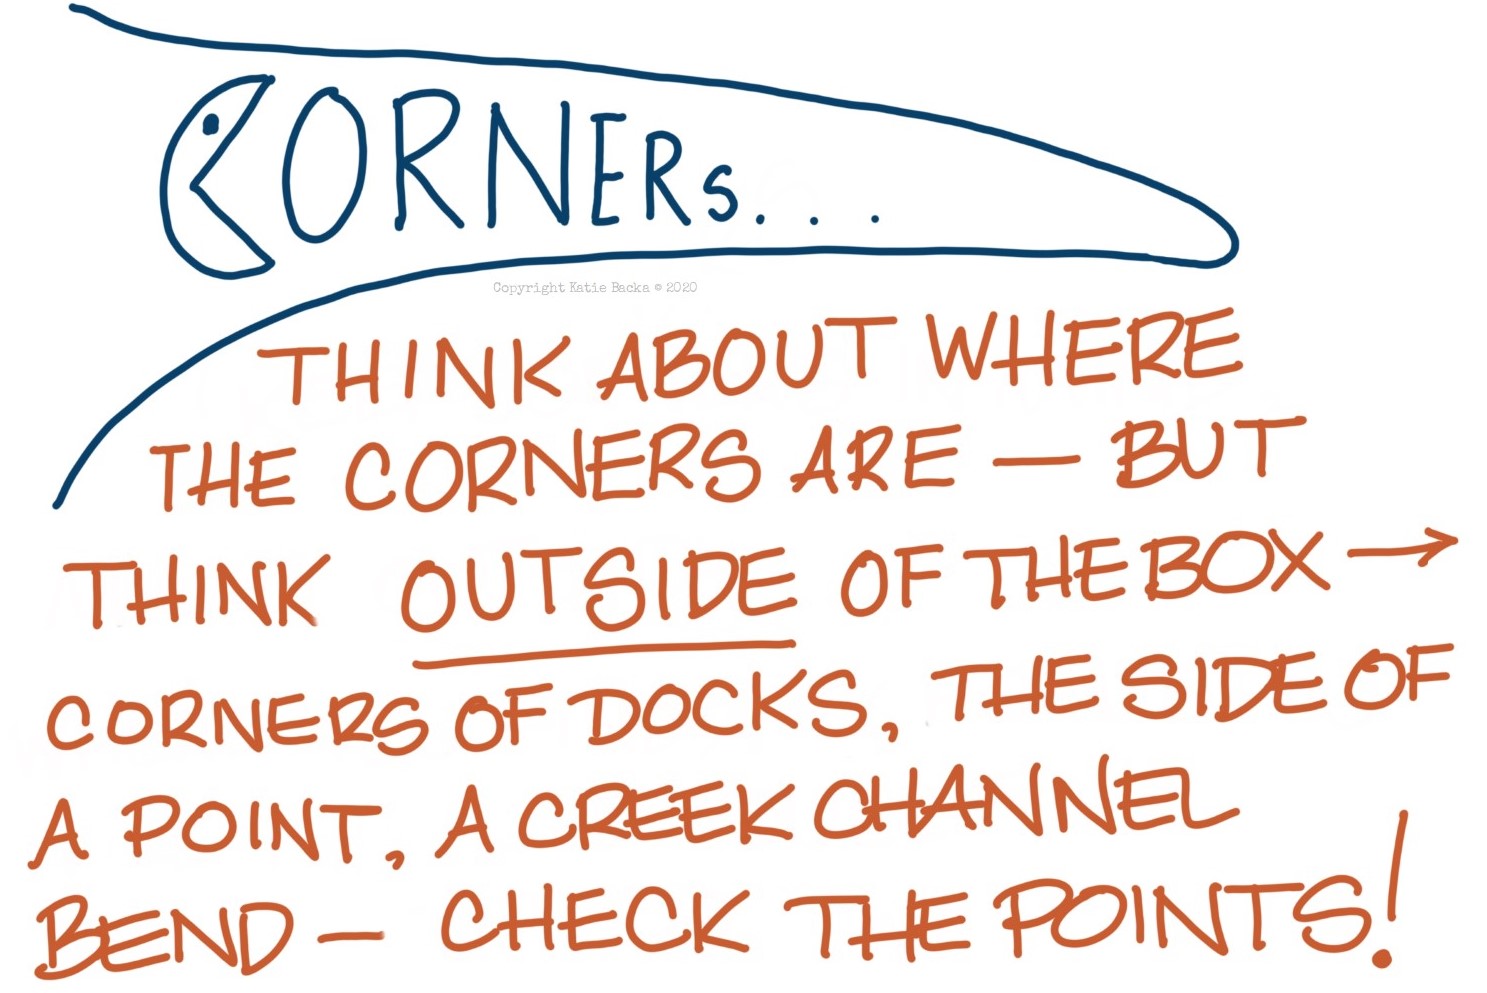 text: Corners: Think about where the corners are - but think OUTSIDE of the box - corners of docks, the side of a point, a creek channel bend - check the points!